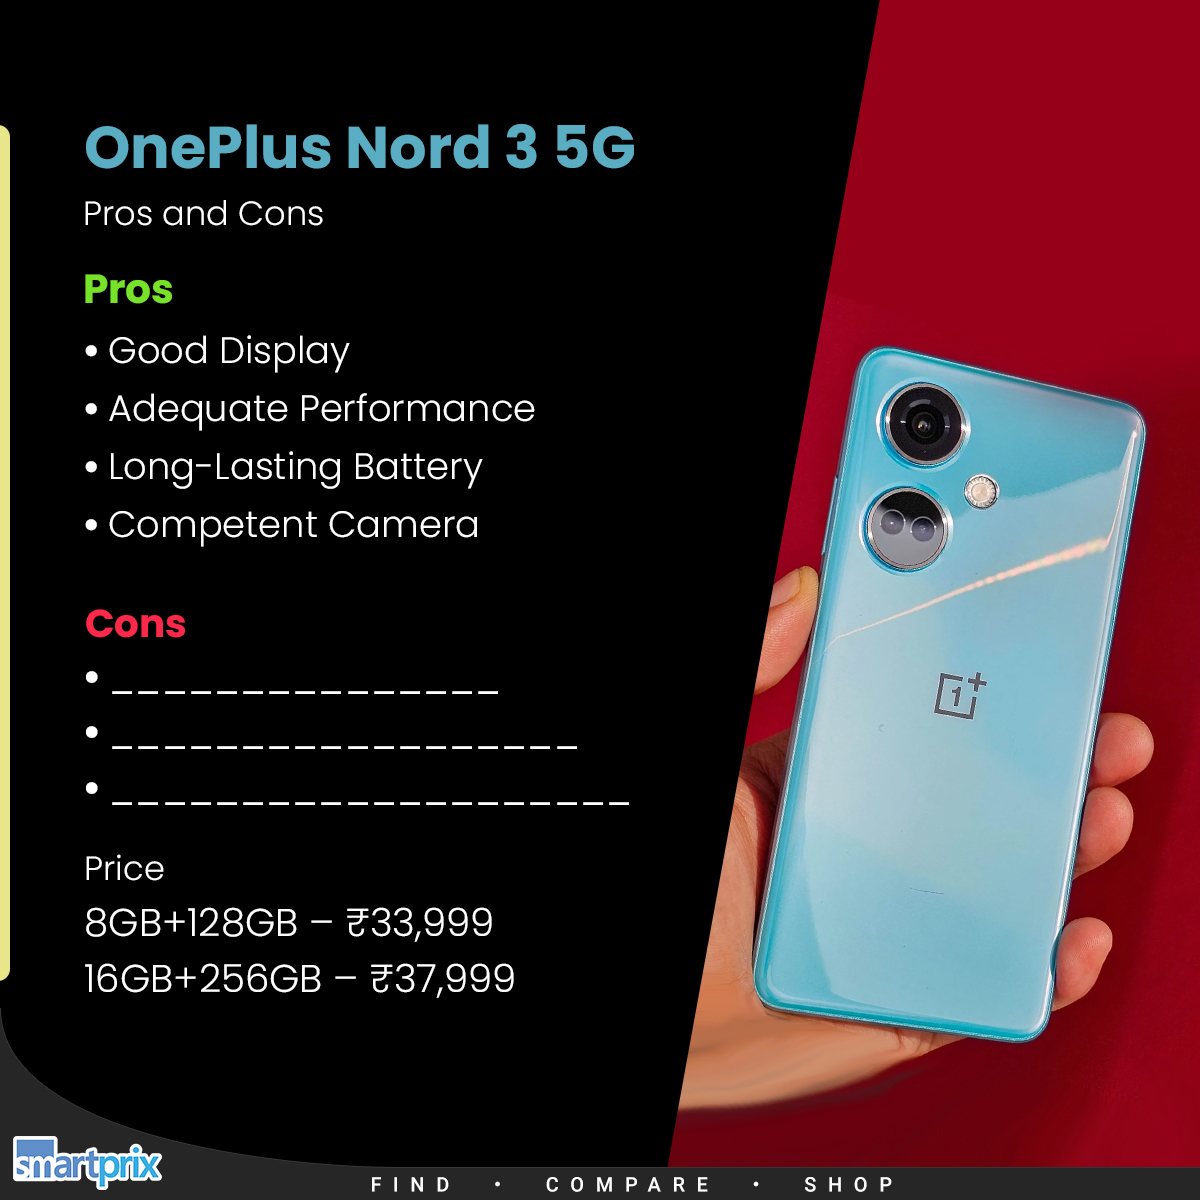 Smartprix on X: Review  OnePlus Nord 3 5G: A Dependable Option   #OnePlus #OnePlusNord3 #Review   / X